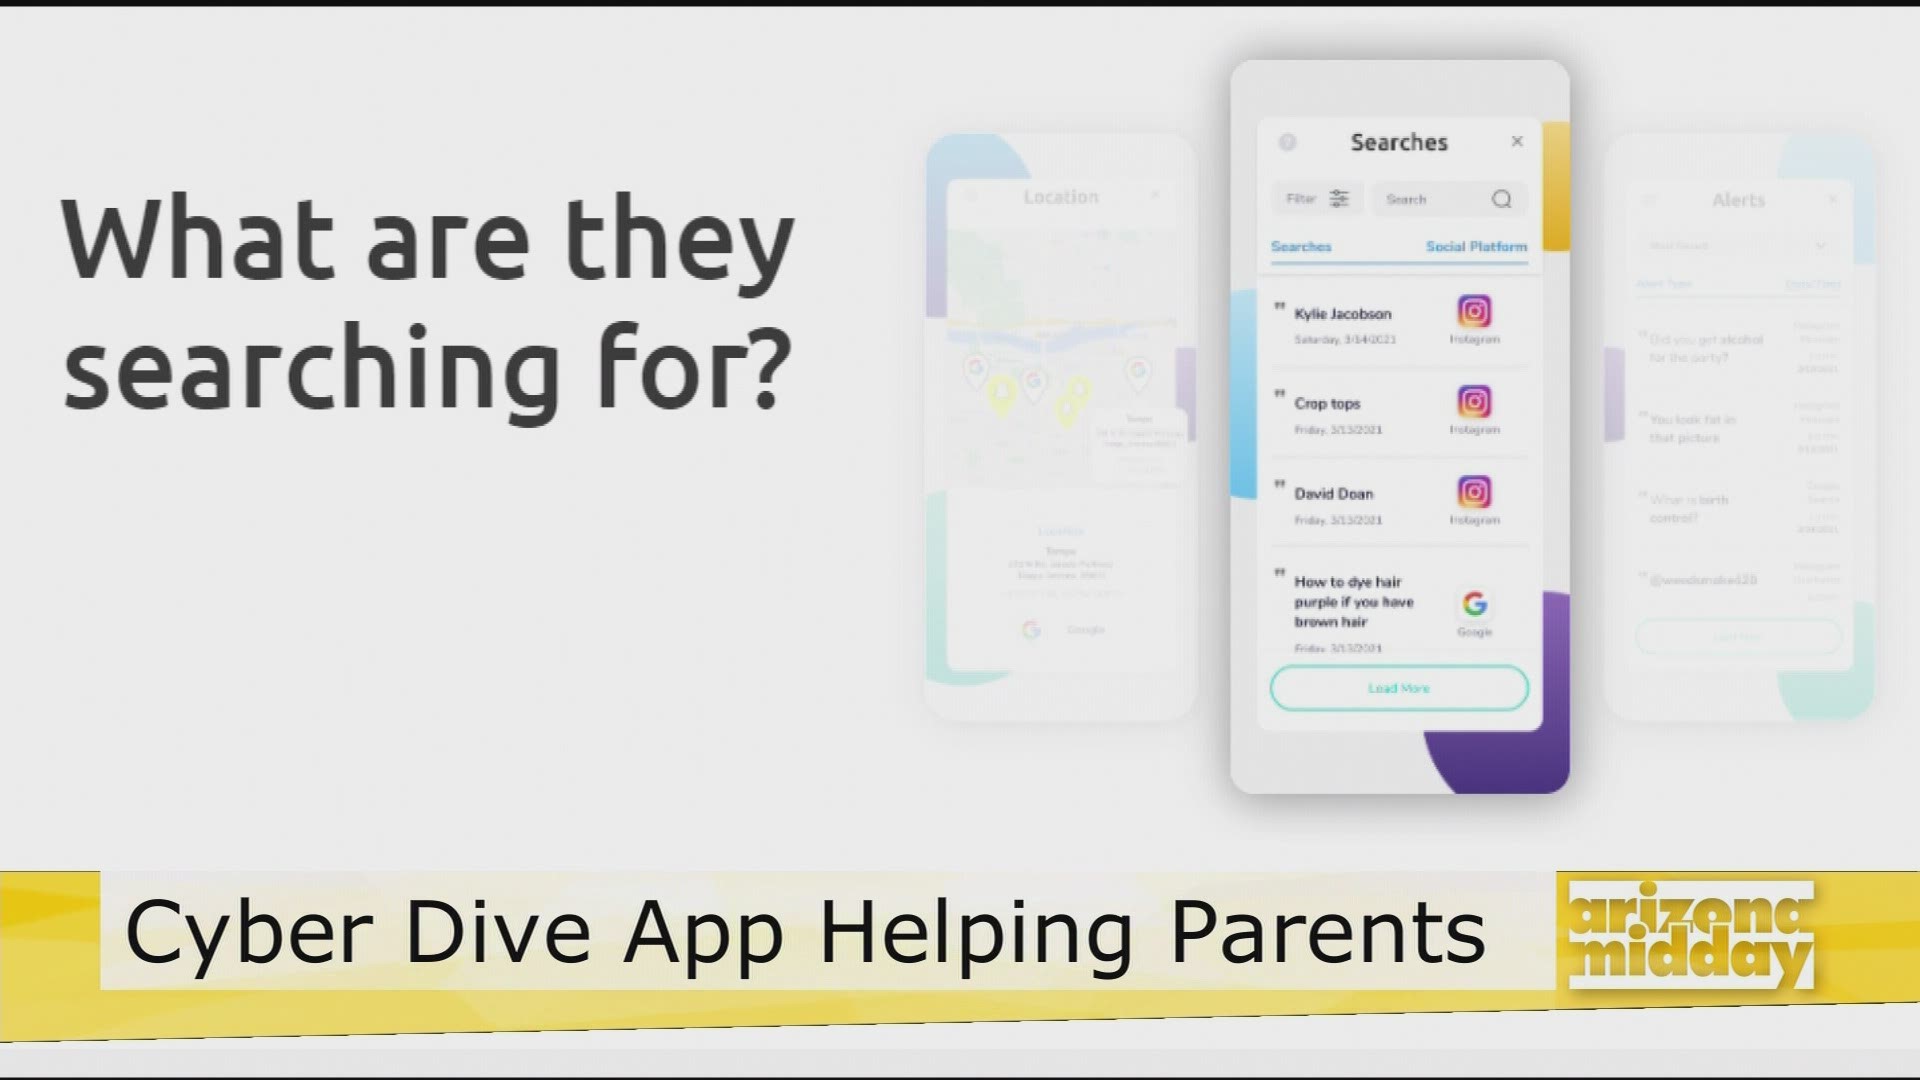 Derek Jackson & Jeff Gottfurcht with Cyber Dive show us how their app is helping families keep their children safe while online